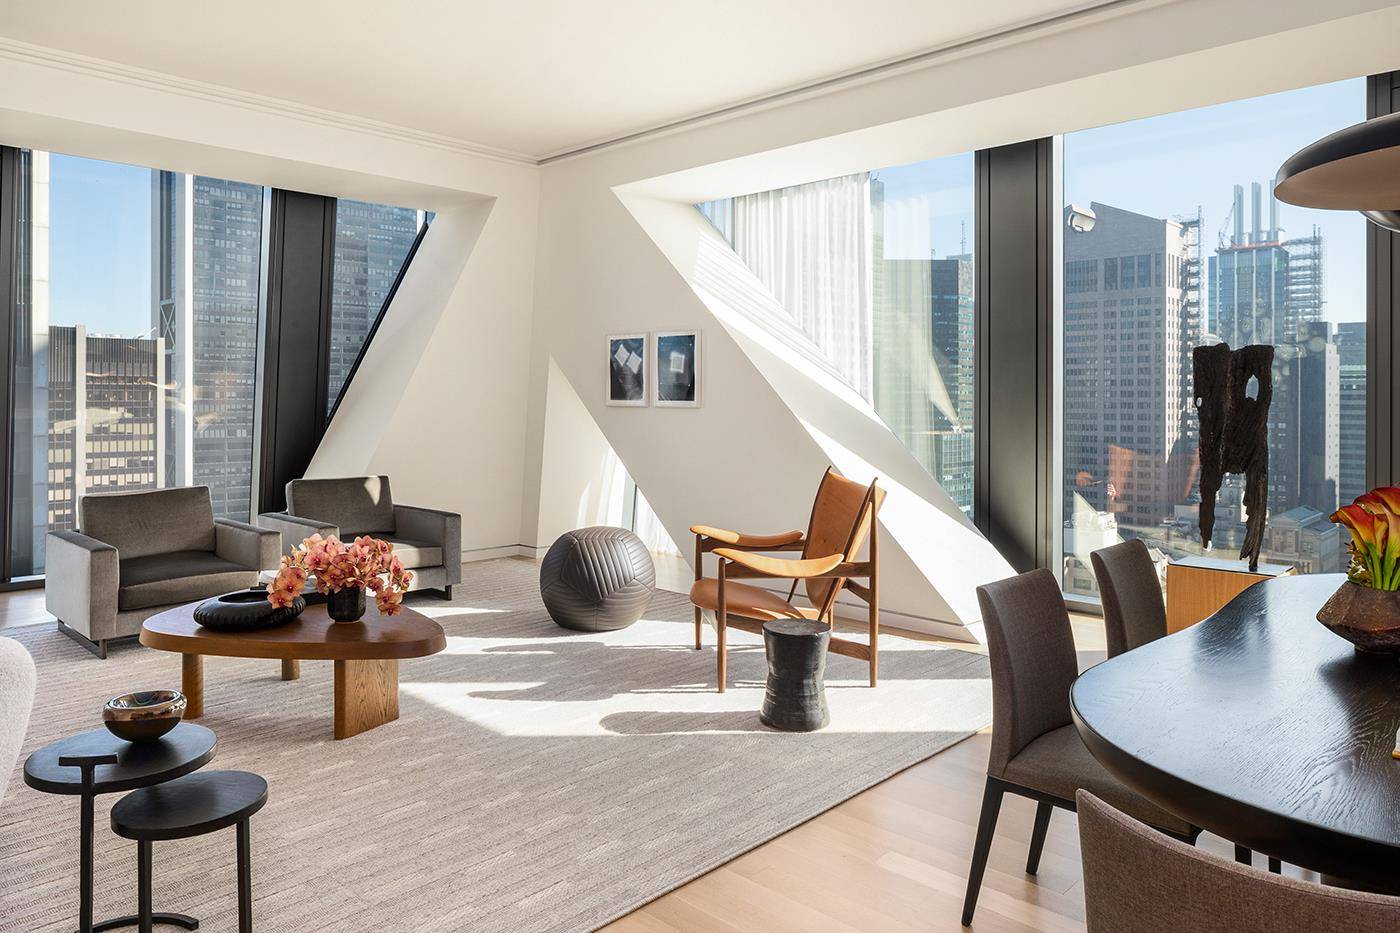 Balancing grand scale living with the intimate feeling of home, Residence 31A at 53 West 53 comprises 3, 558 square feet, offering three bedrooms, three and a half bathrooms, and ...